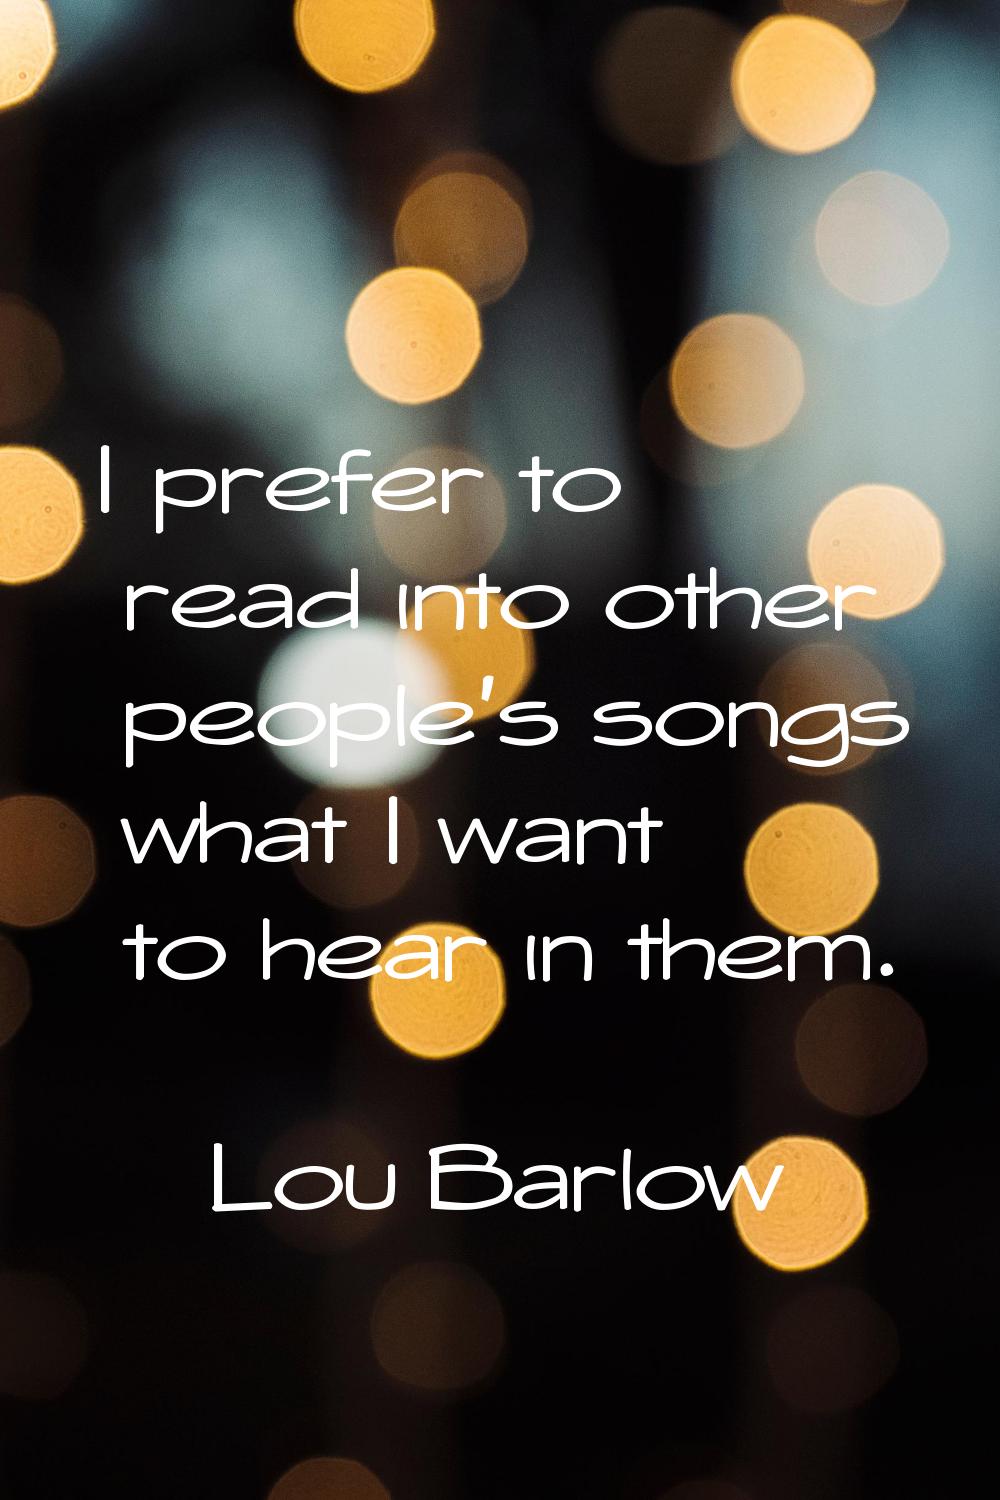 I prefer to read into other people's songs what I want to hear in them.